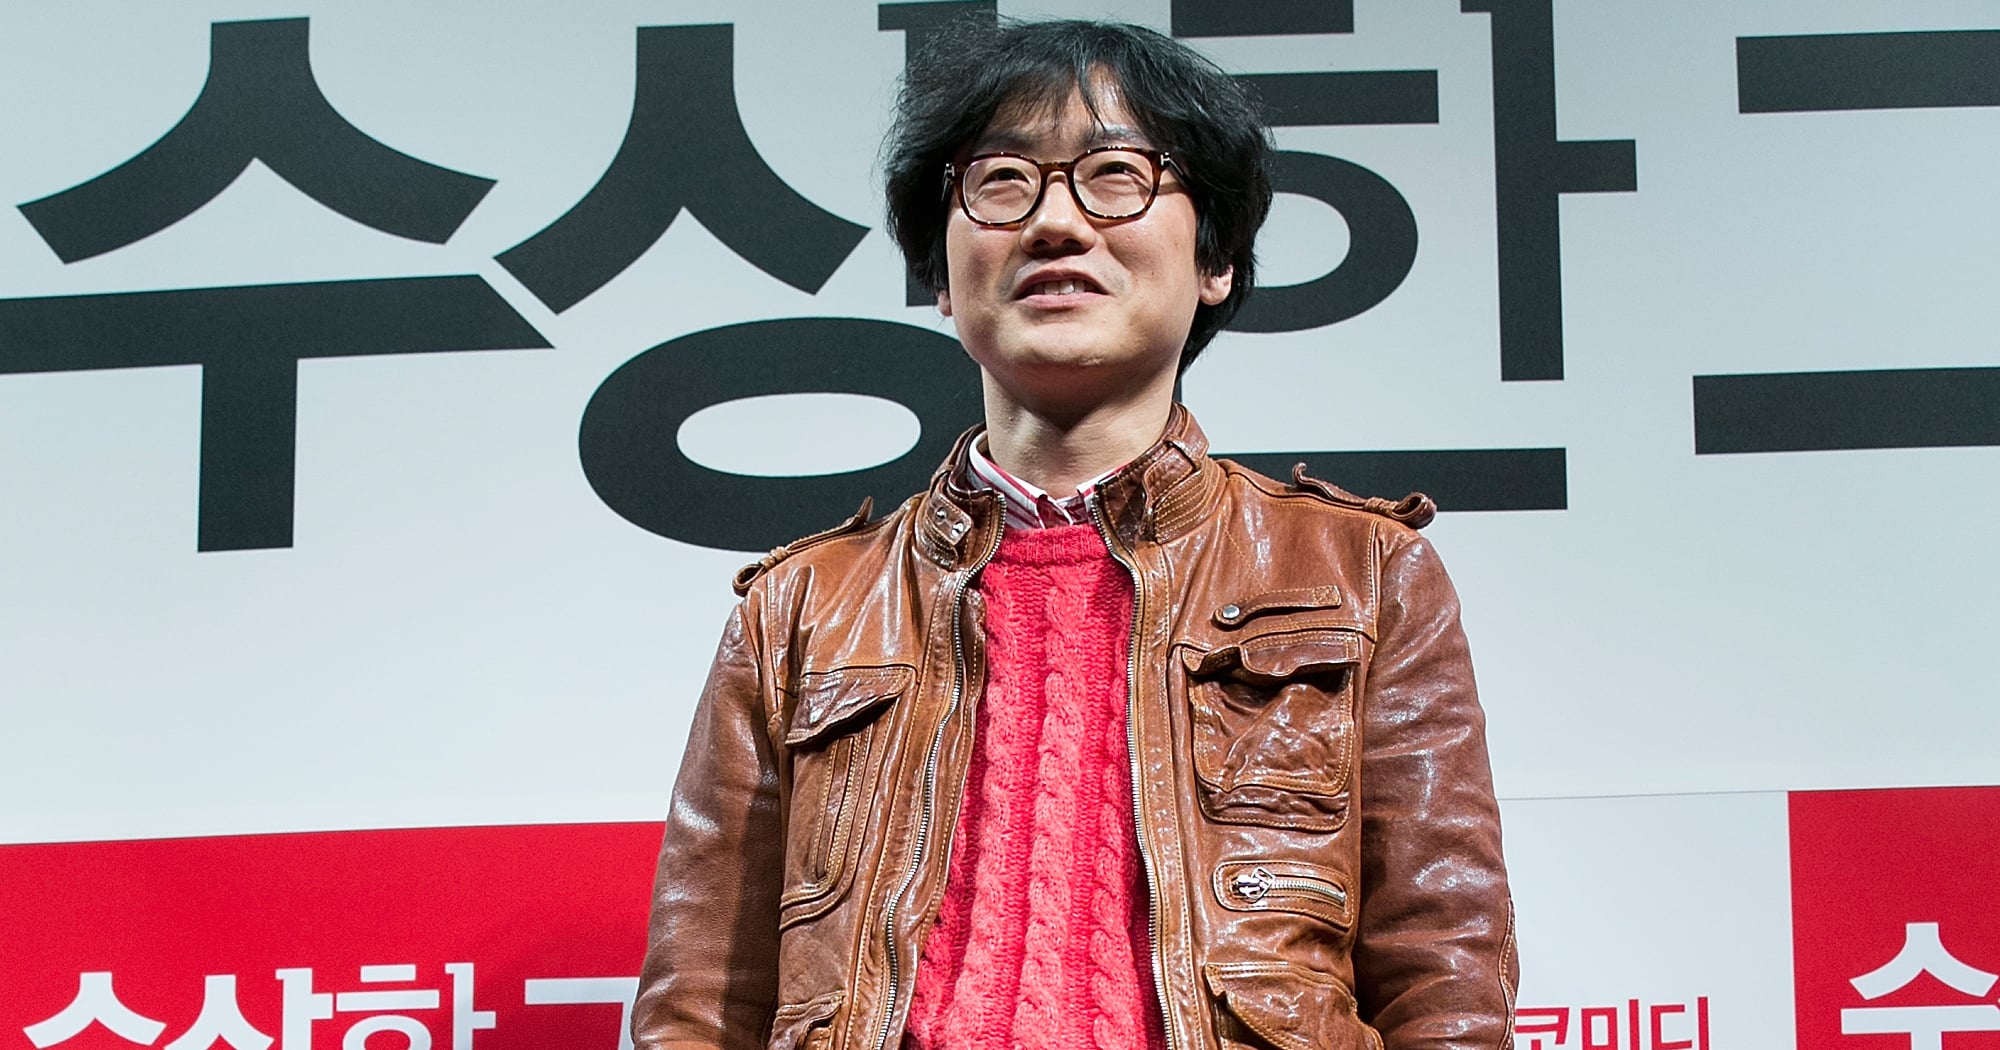 Squid Game' Creator Hwang Dong-hyuk Looks Back on Developing Series – The  Hollywood Reporter